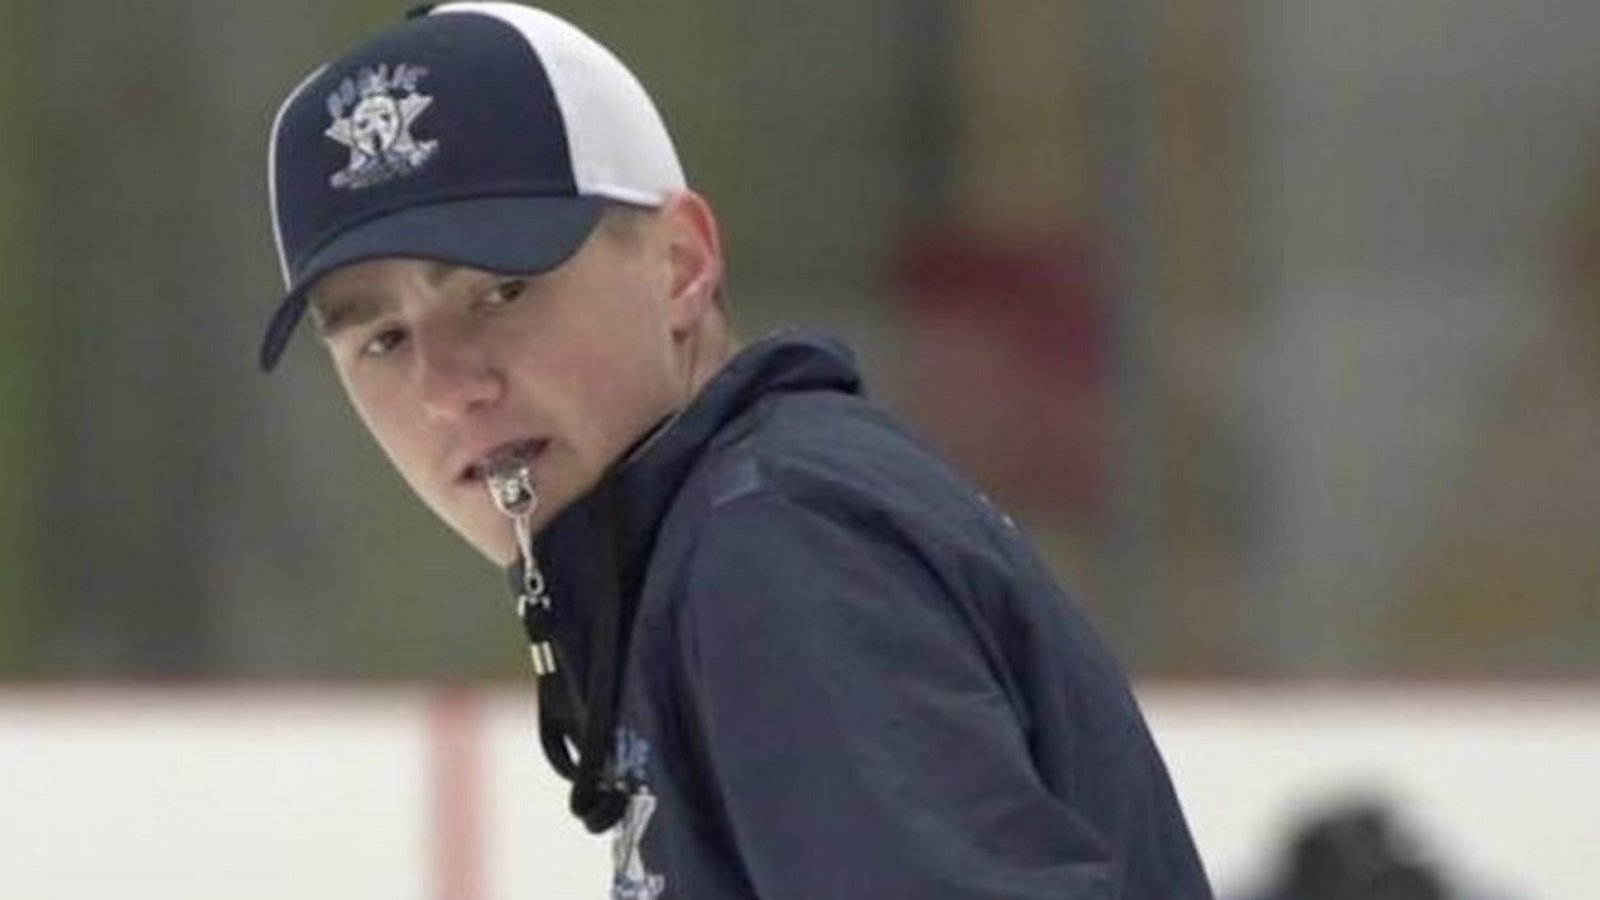 Breaking: Hockey coach arrested on charges of suspected child abuse. 